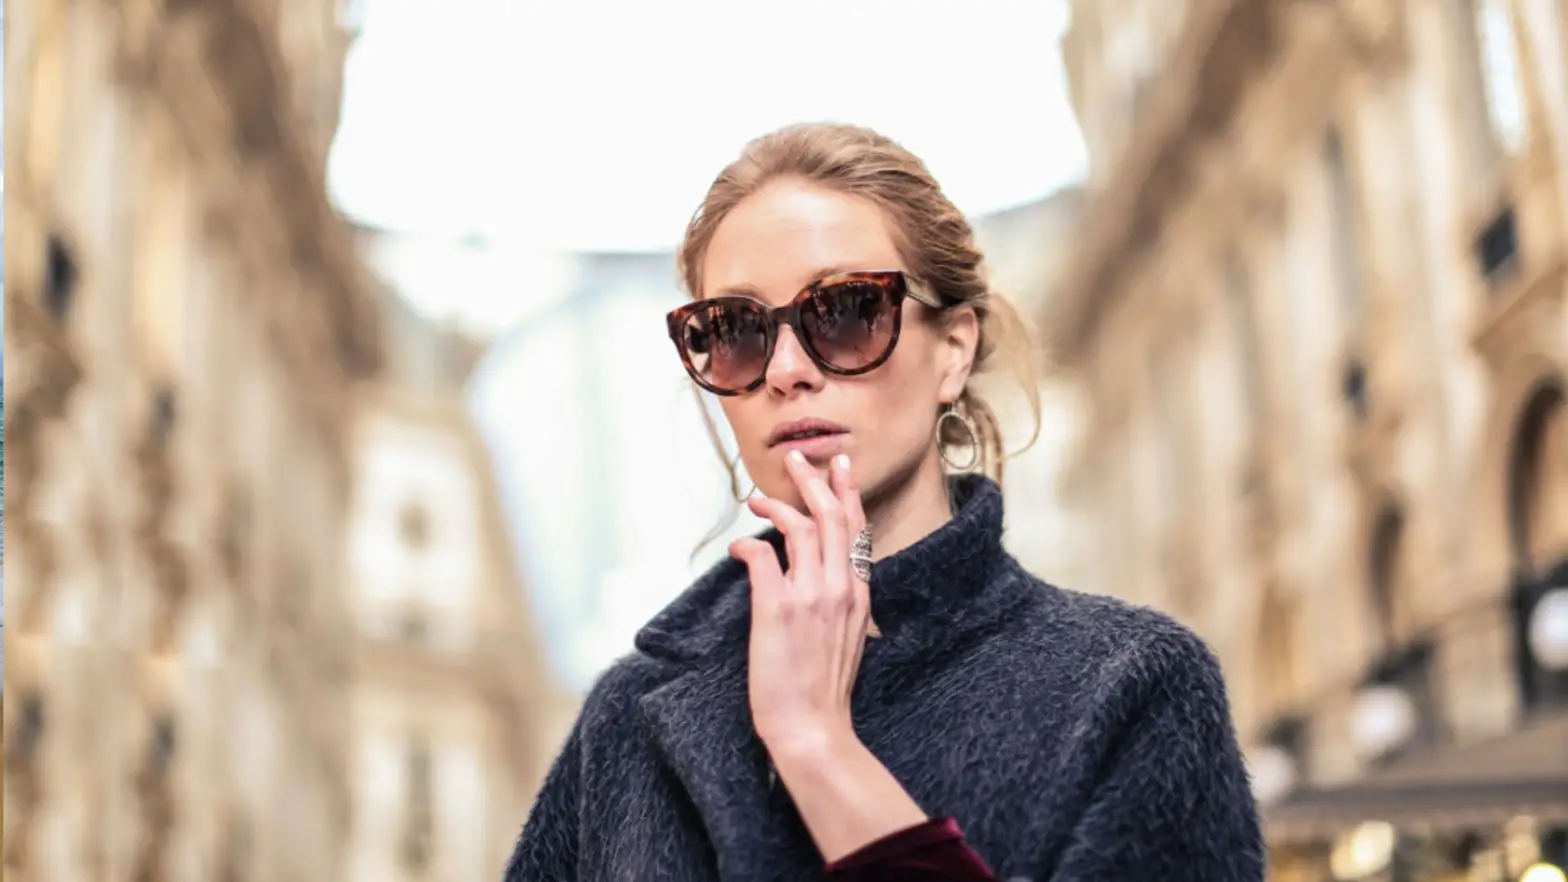 How to Wear Sunglasses Without Smudging Your Eye Makeup